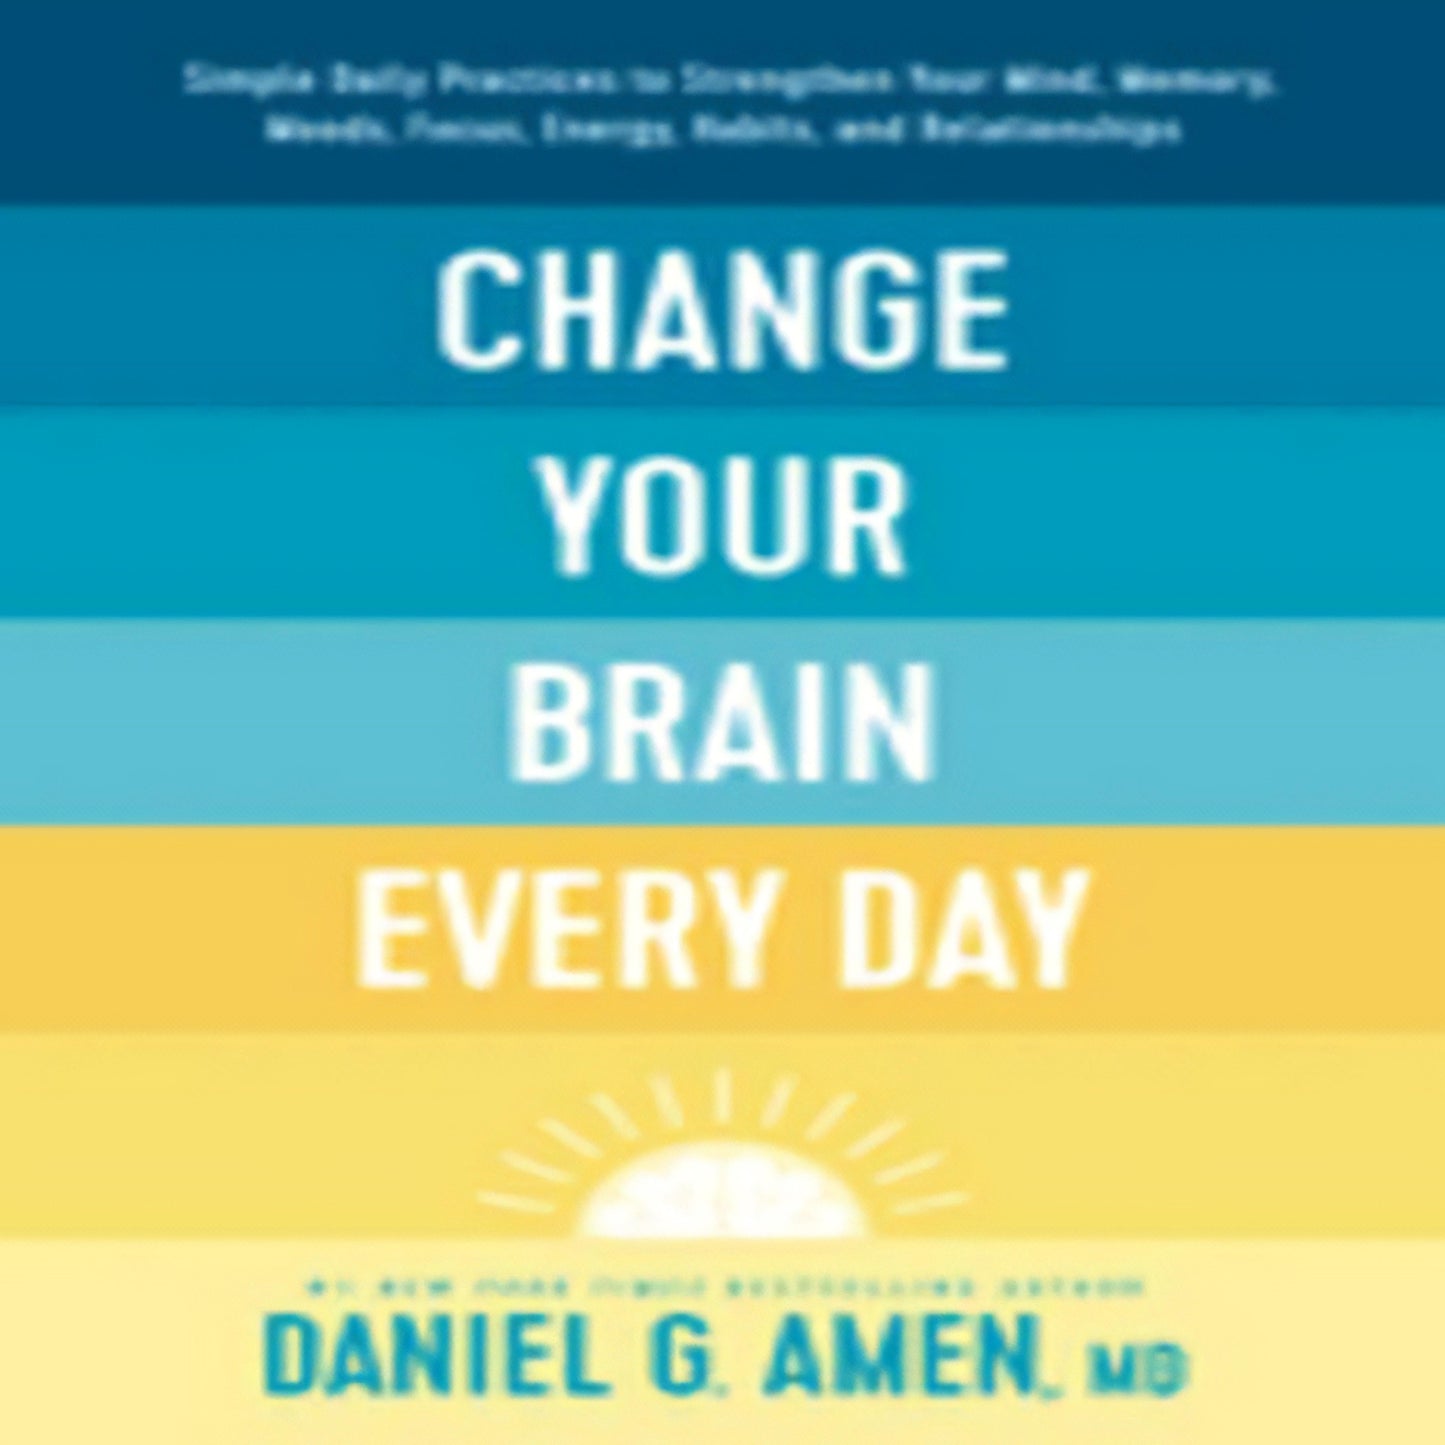 Change Your Brain Every Day: Simple Daily Practices213-031423-149645457XDPGBOOKSTORE.COM. Today's Bestsellers.